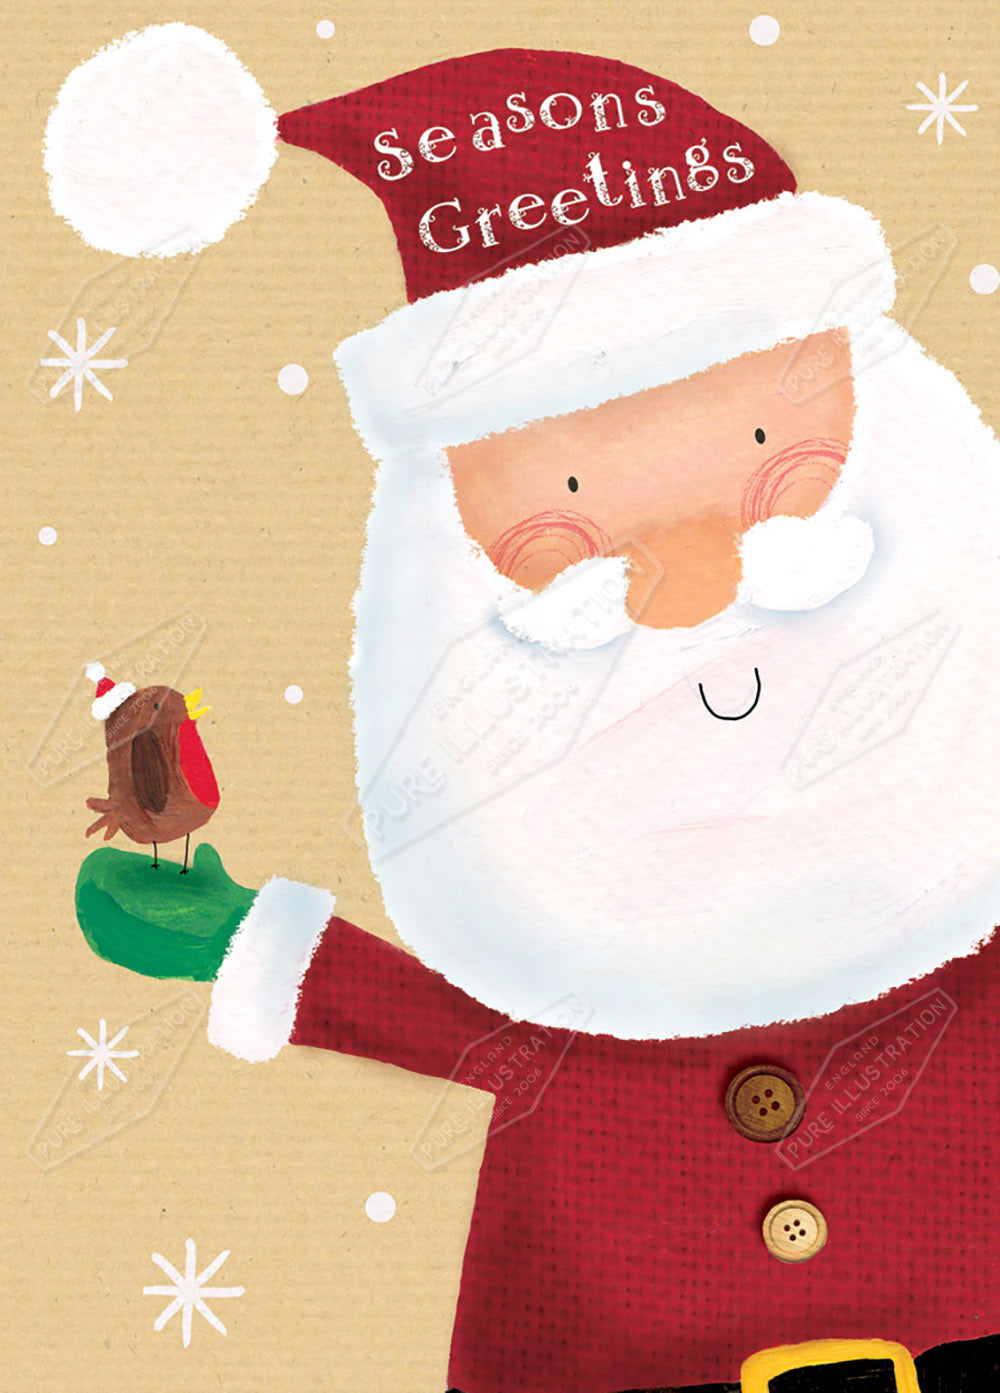 Father Christmas / Santa Seasons Greetings by Cory Reid for Pure Art Licensing Agency & Surface Design Studio